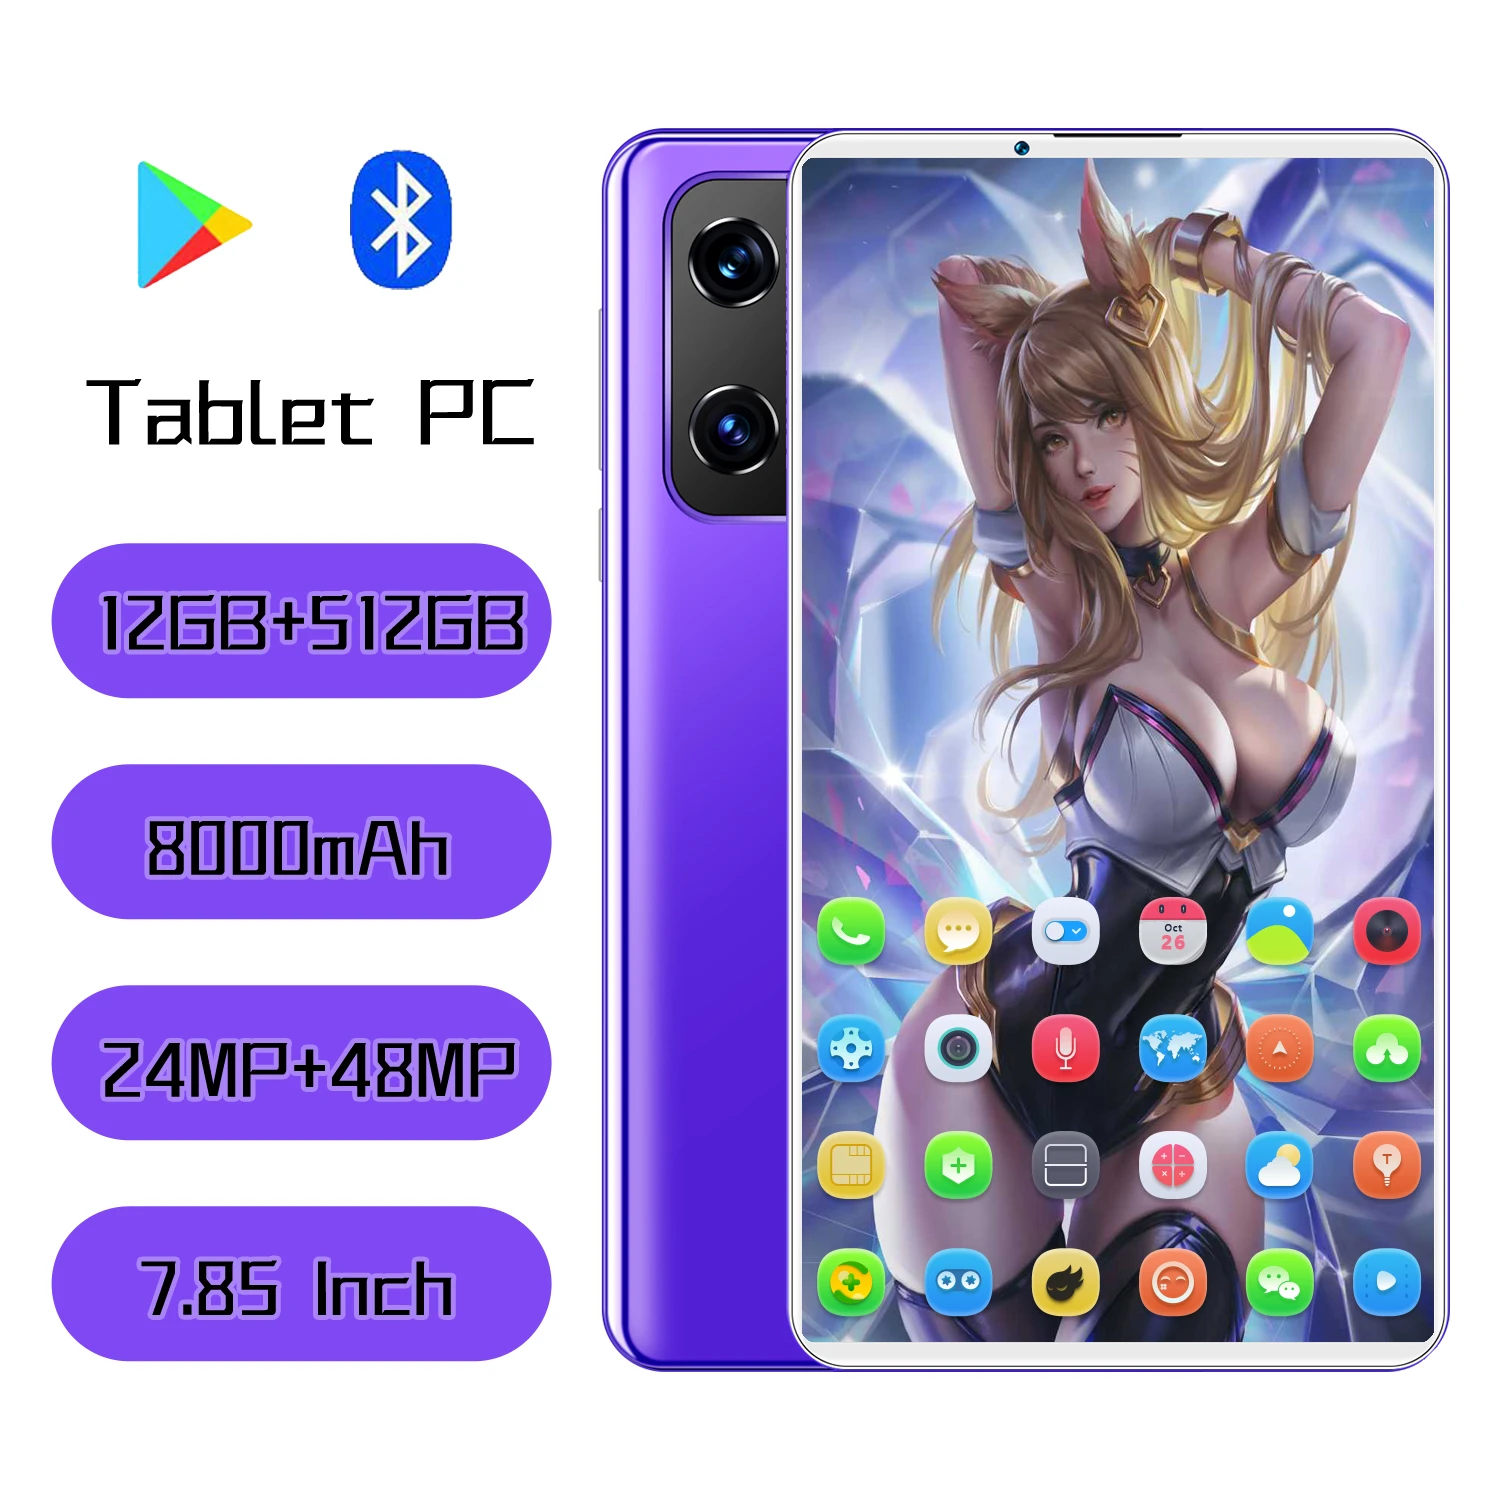 small android tablet 7.85 Inch Tablet PC 8000mAh M12 5G Andorid Google Play 12GB+512GB GPS Pad Face ID 24+48MP Tablette WPS Office Global Version the newest tablet